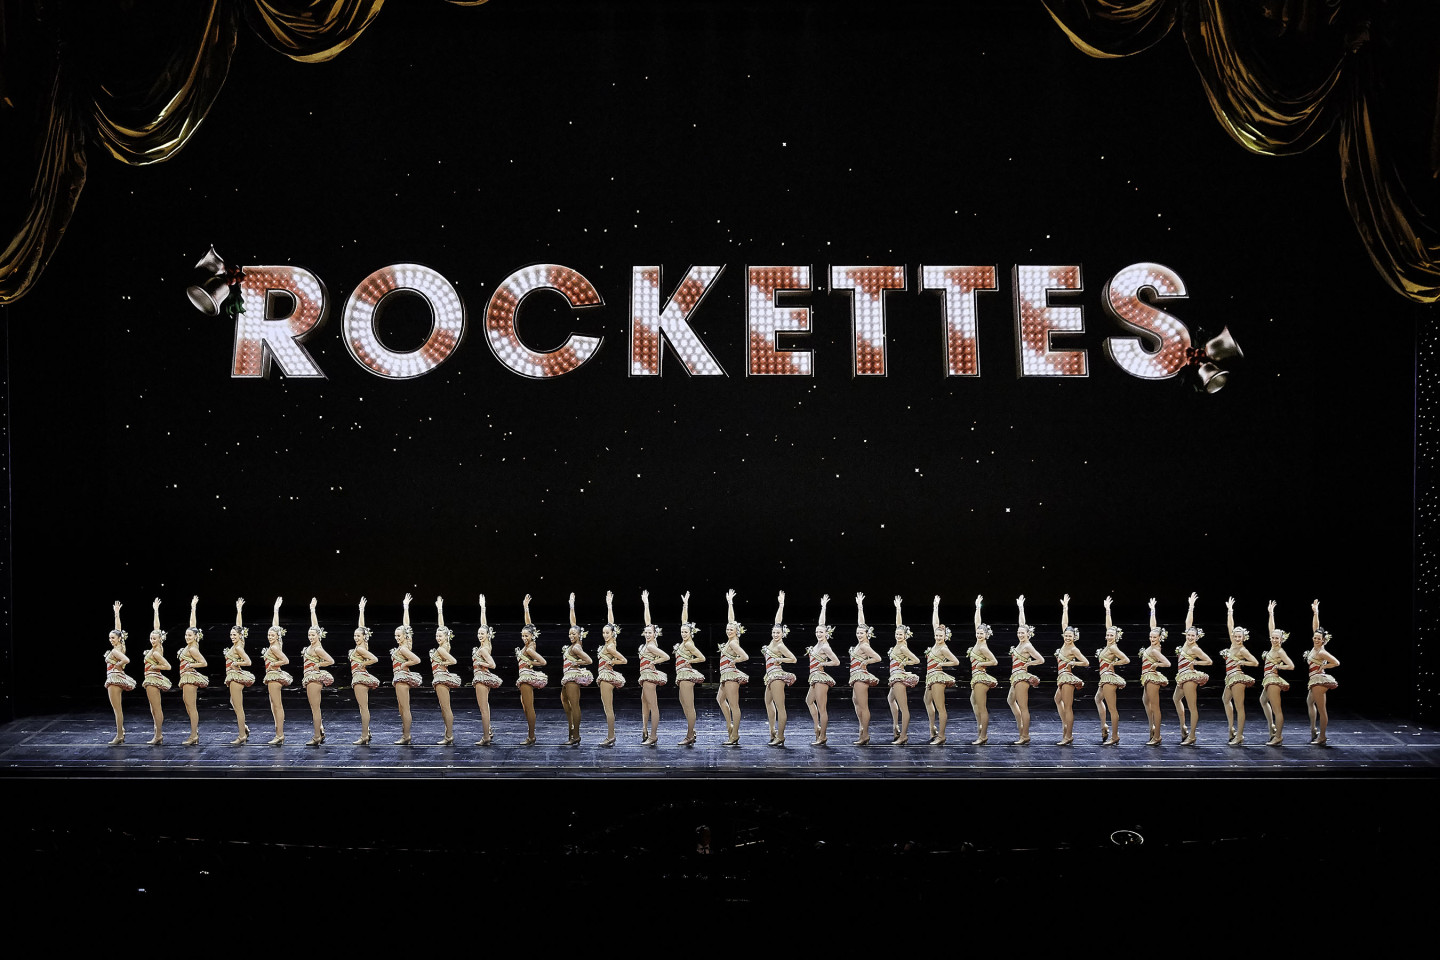 A photo of dancers in a line on stage and "Rockettes" written on the background above in red and white. Photo courtesy MSG Entertainment.